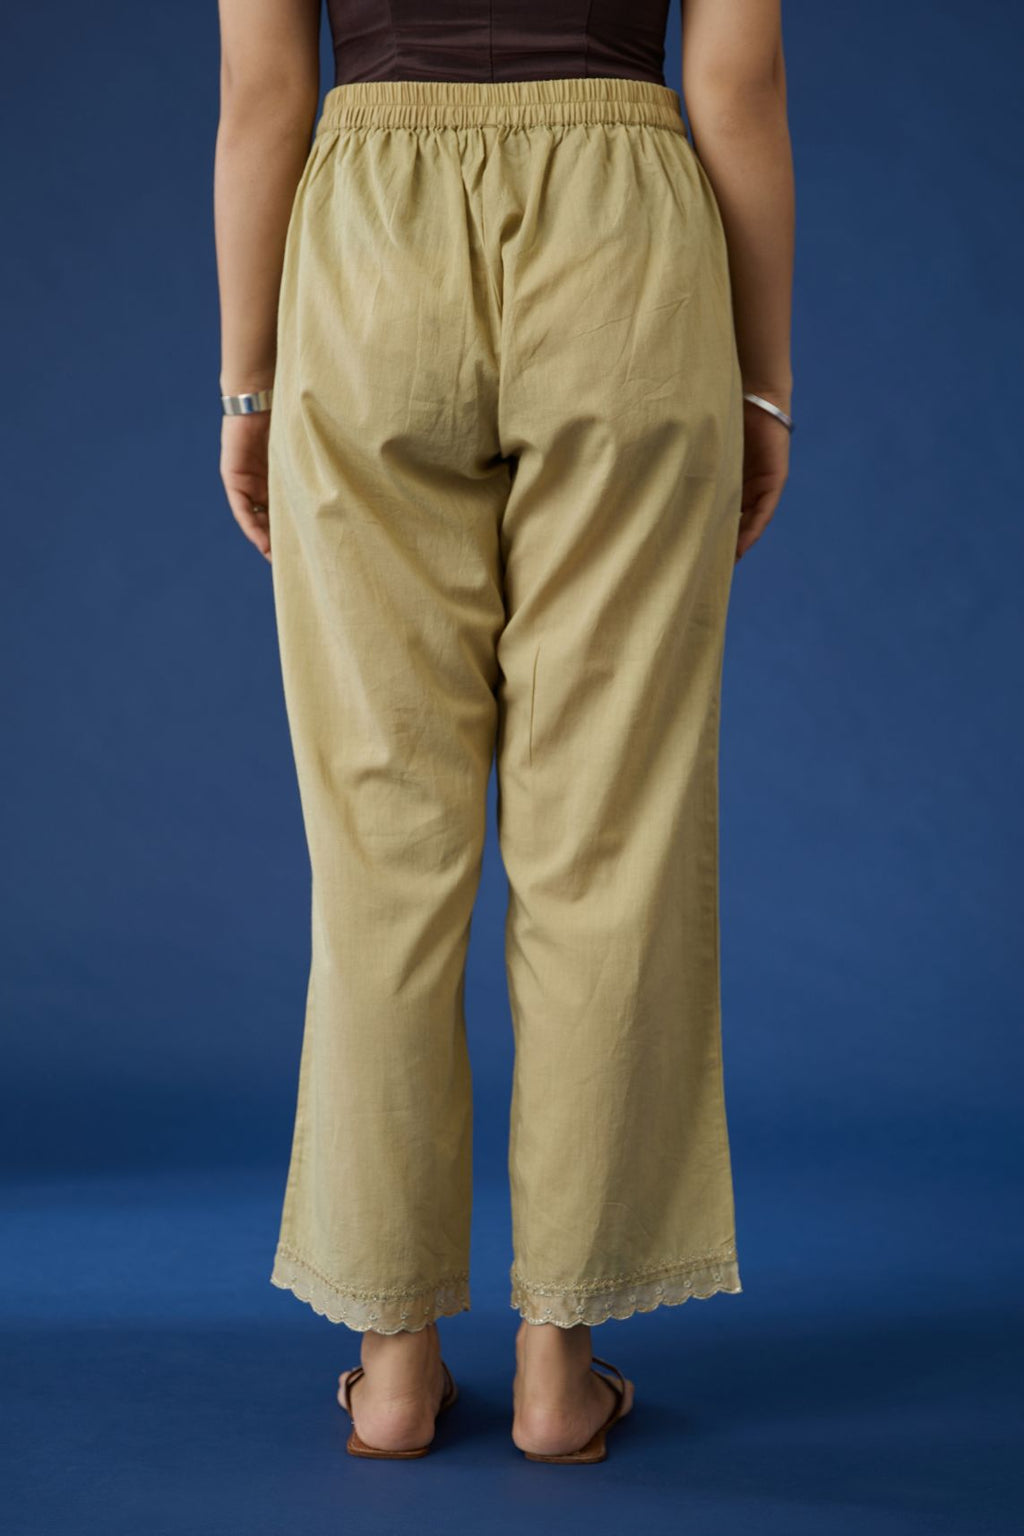 Olive cotton straight pants with gota and dori embroidery at bottom hem (Pants)